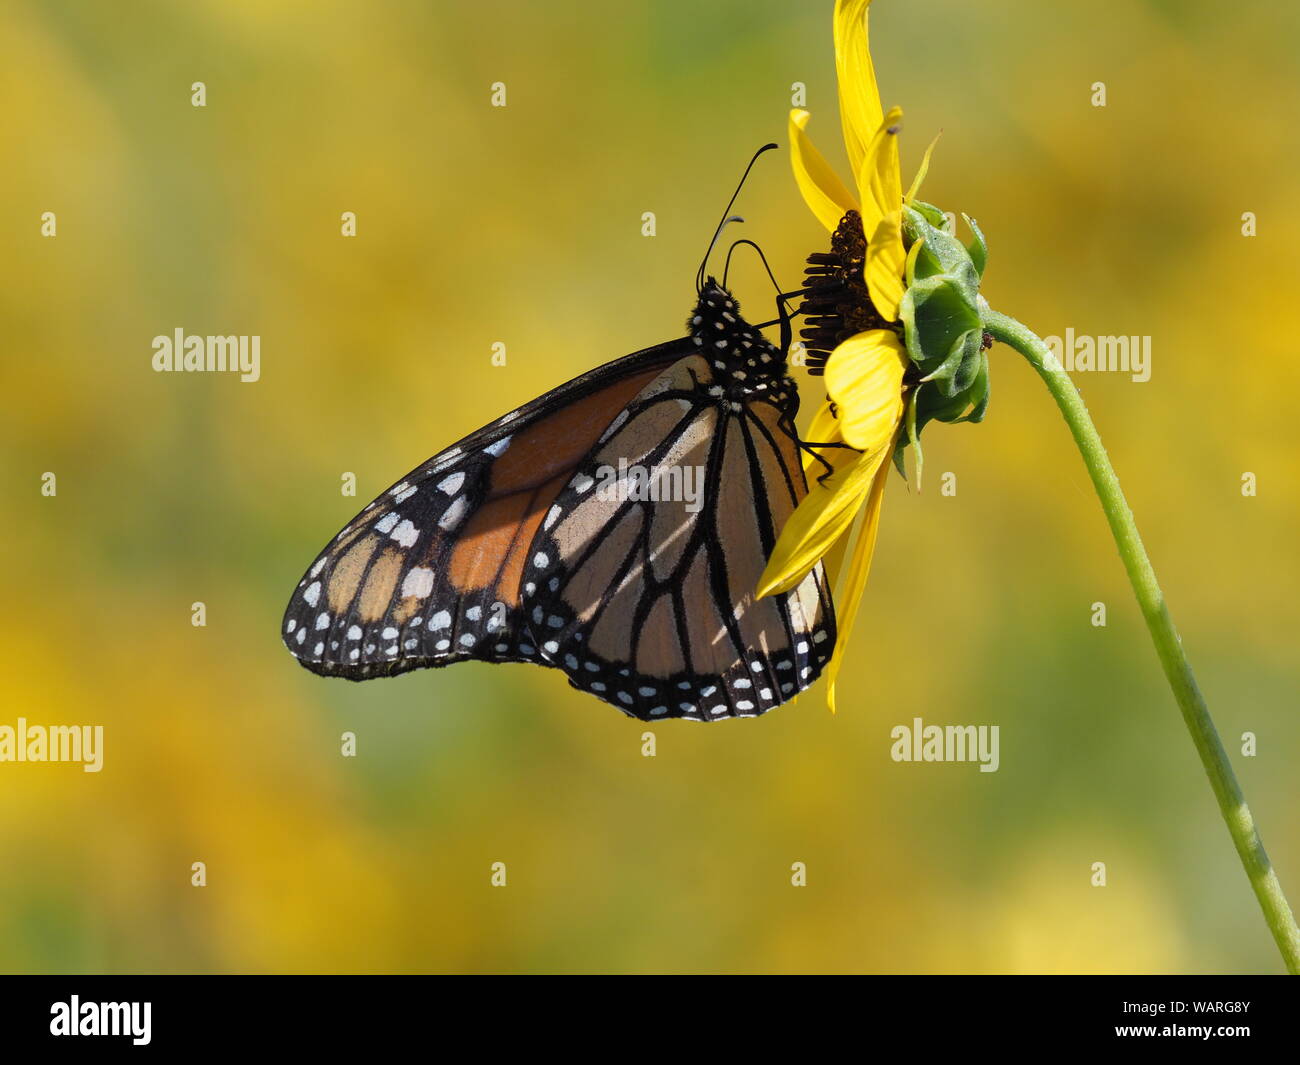 Monarch Butterfly on a sunflower Stock Photo